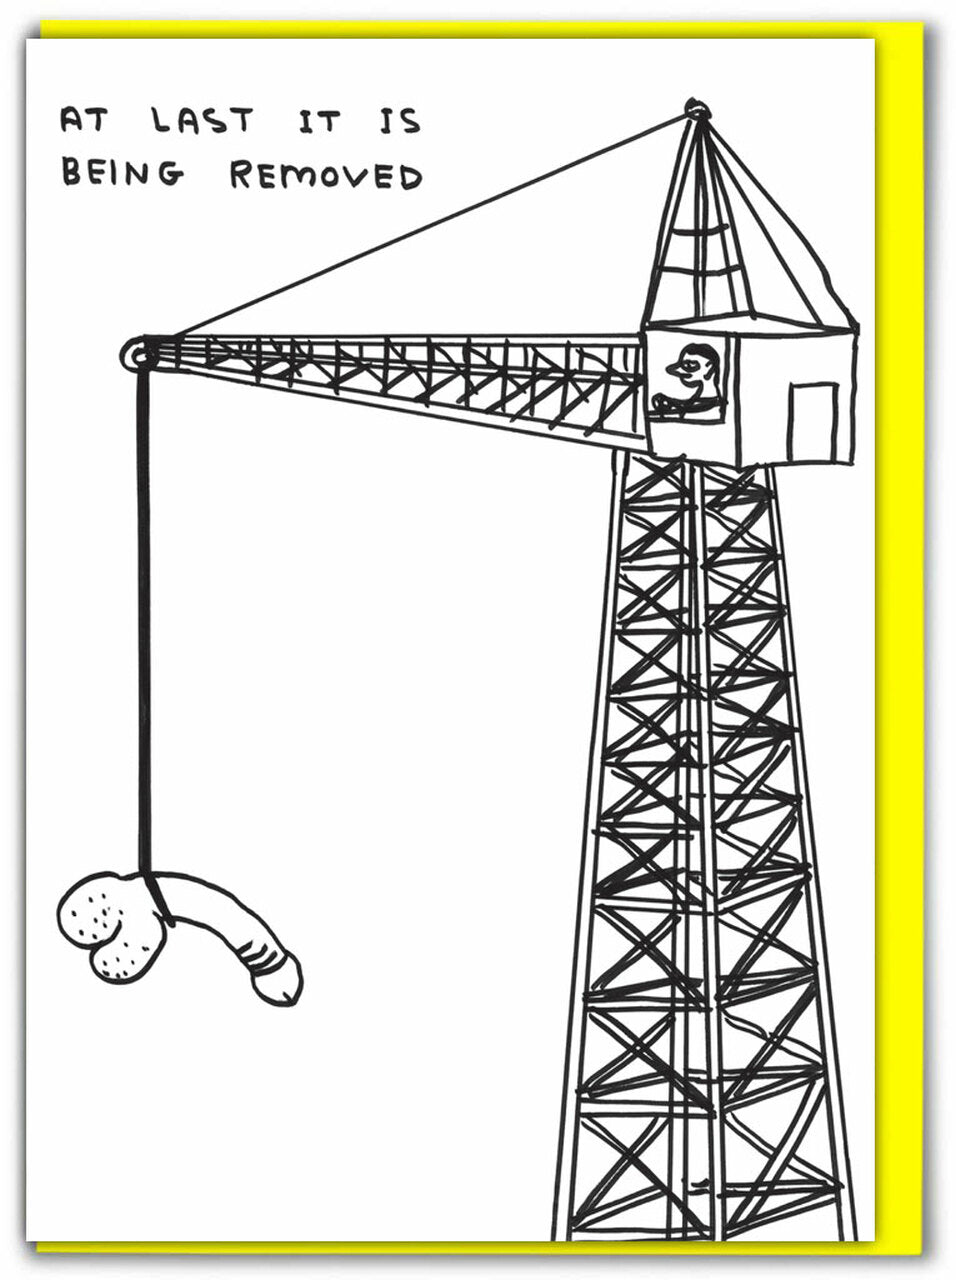 AT LAST IT IS BEING REMOVED Card by David Shrigley